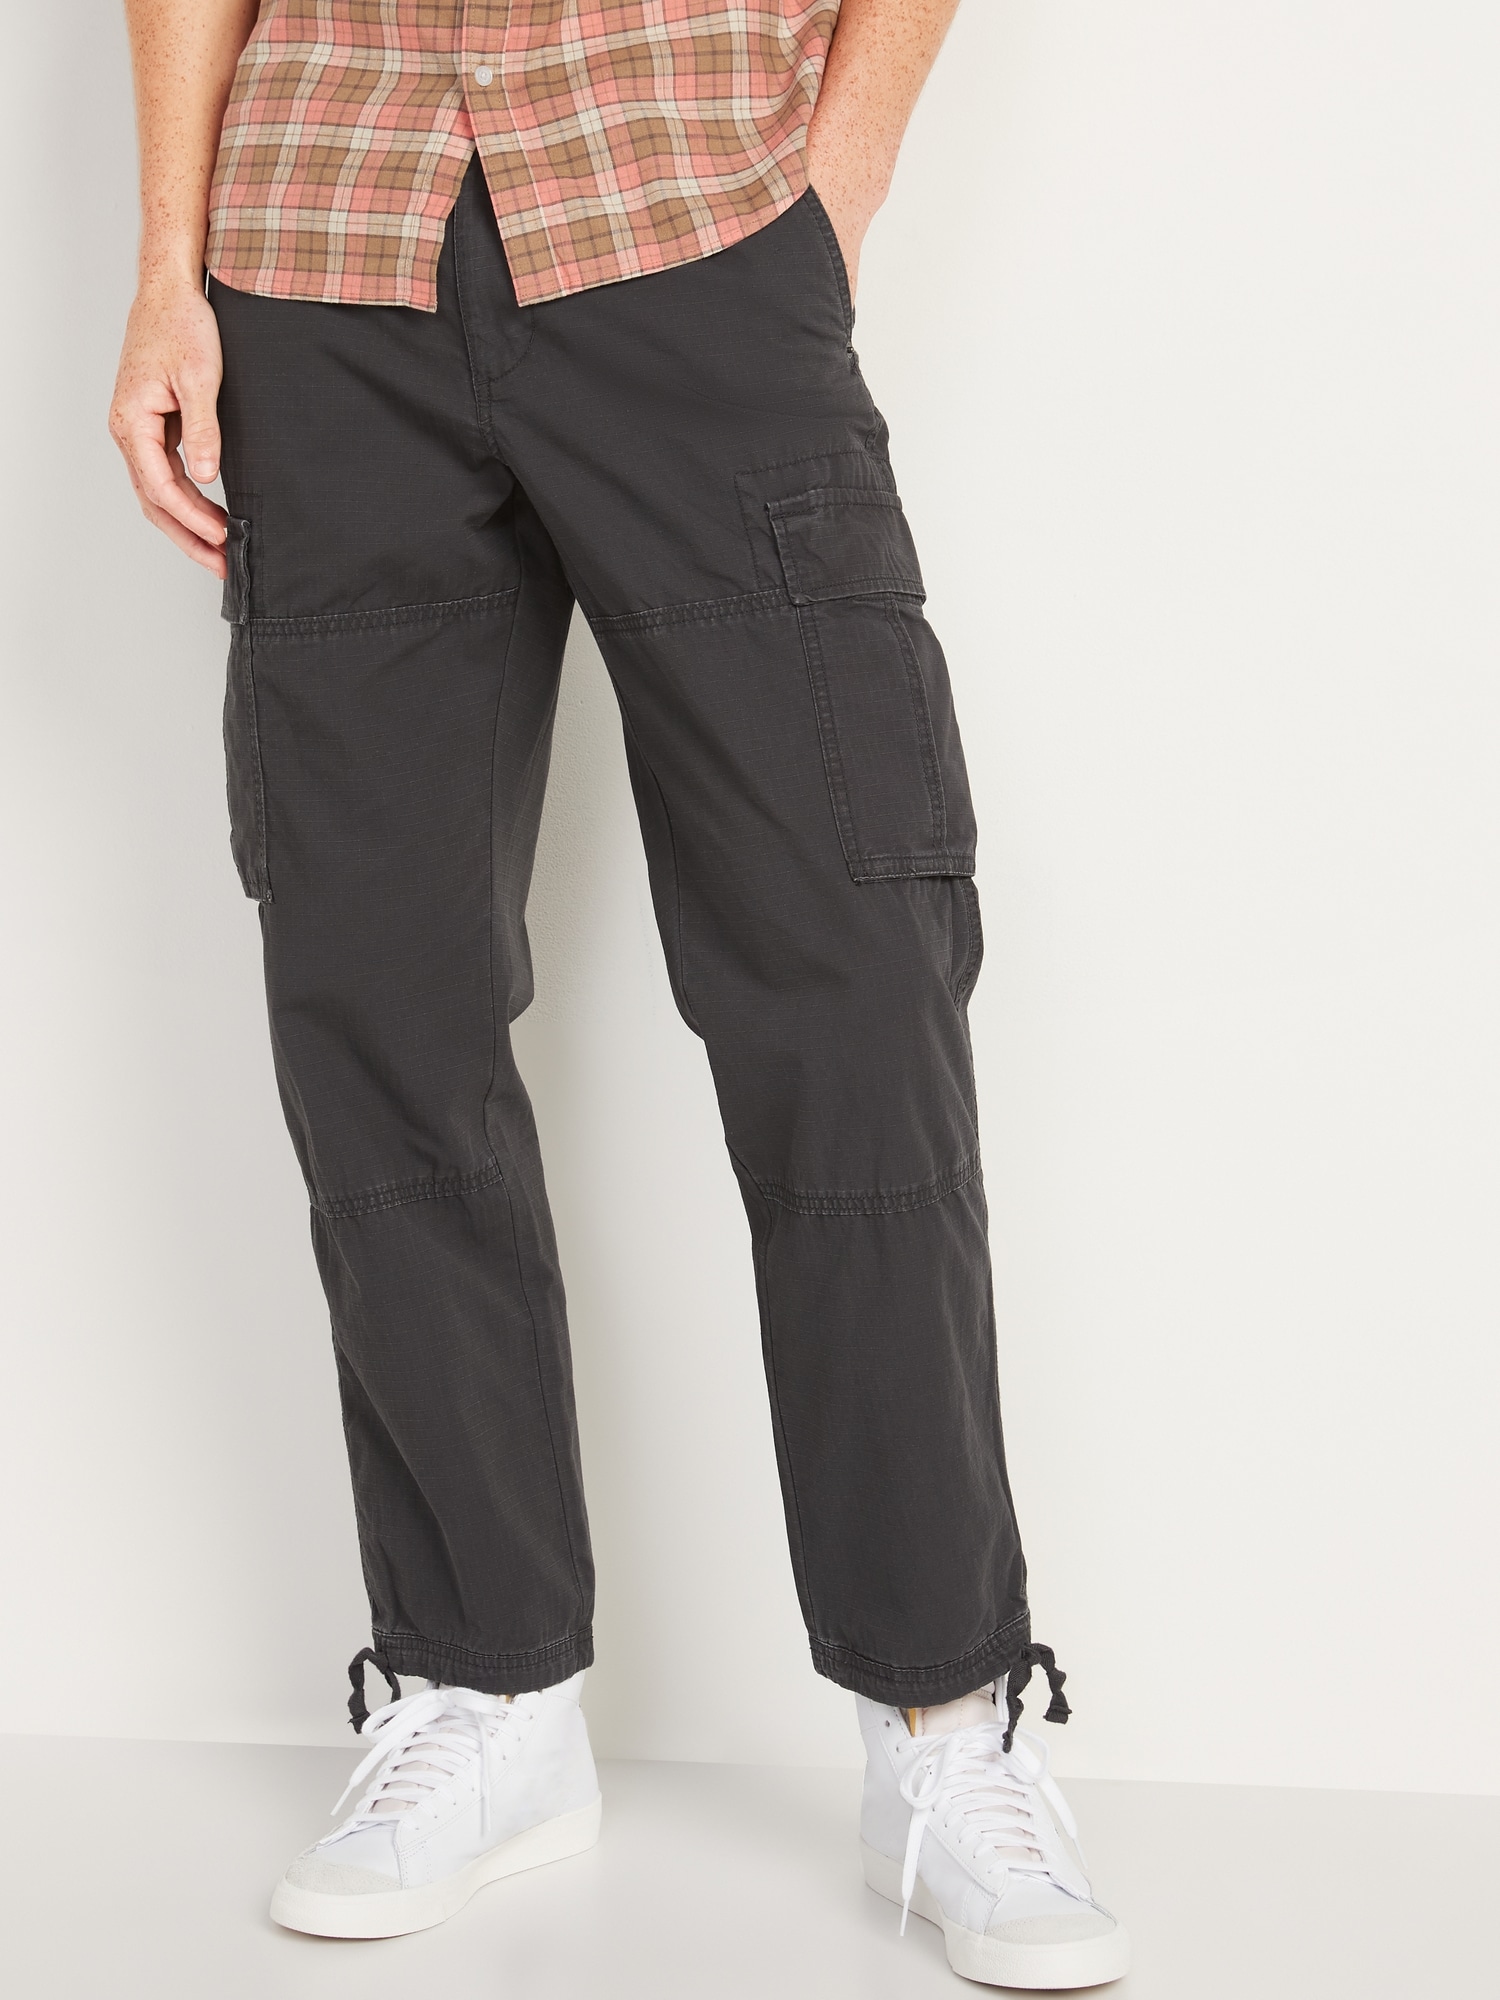 Loose Taper Ripstop Non-Stretch '94 Cargo Pants for Men | Old Navy